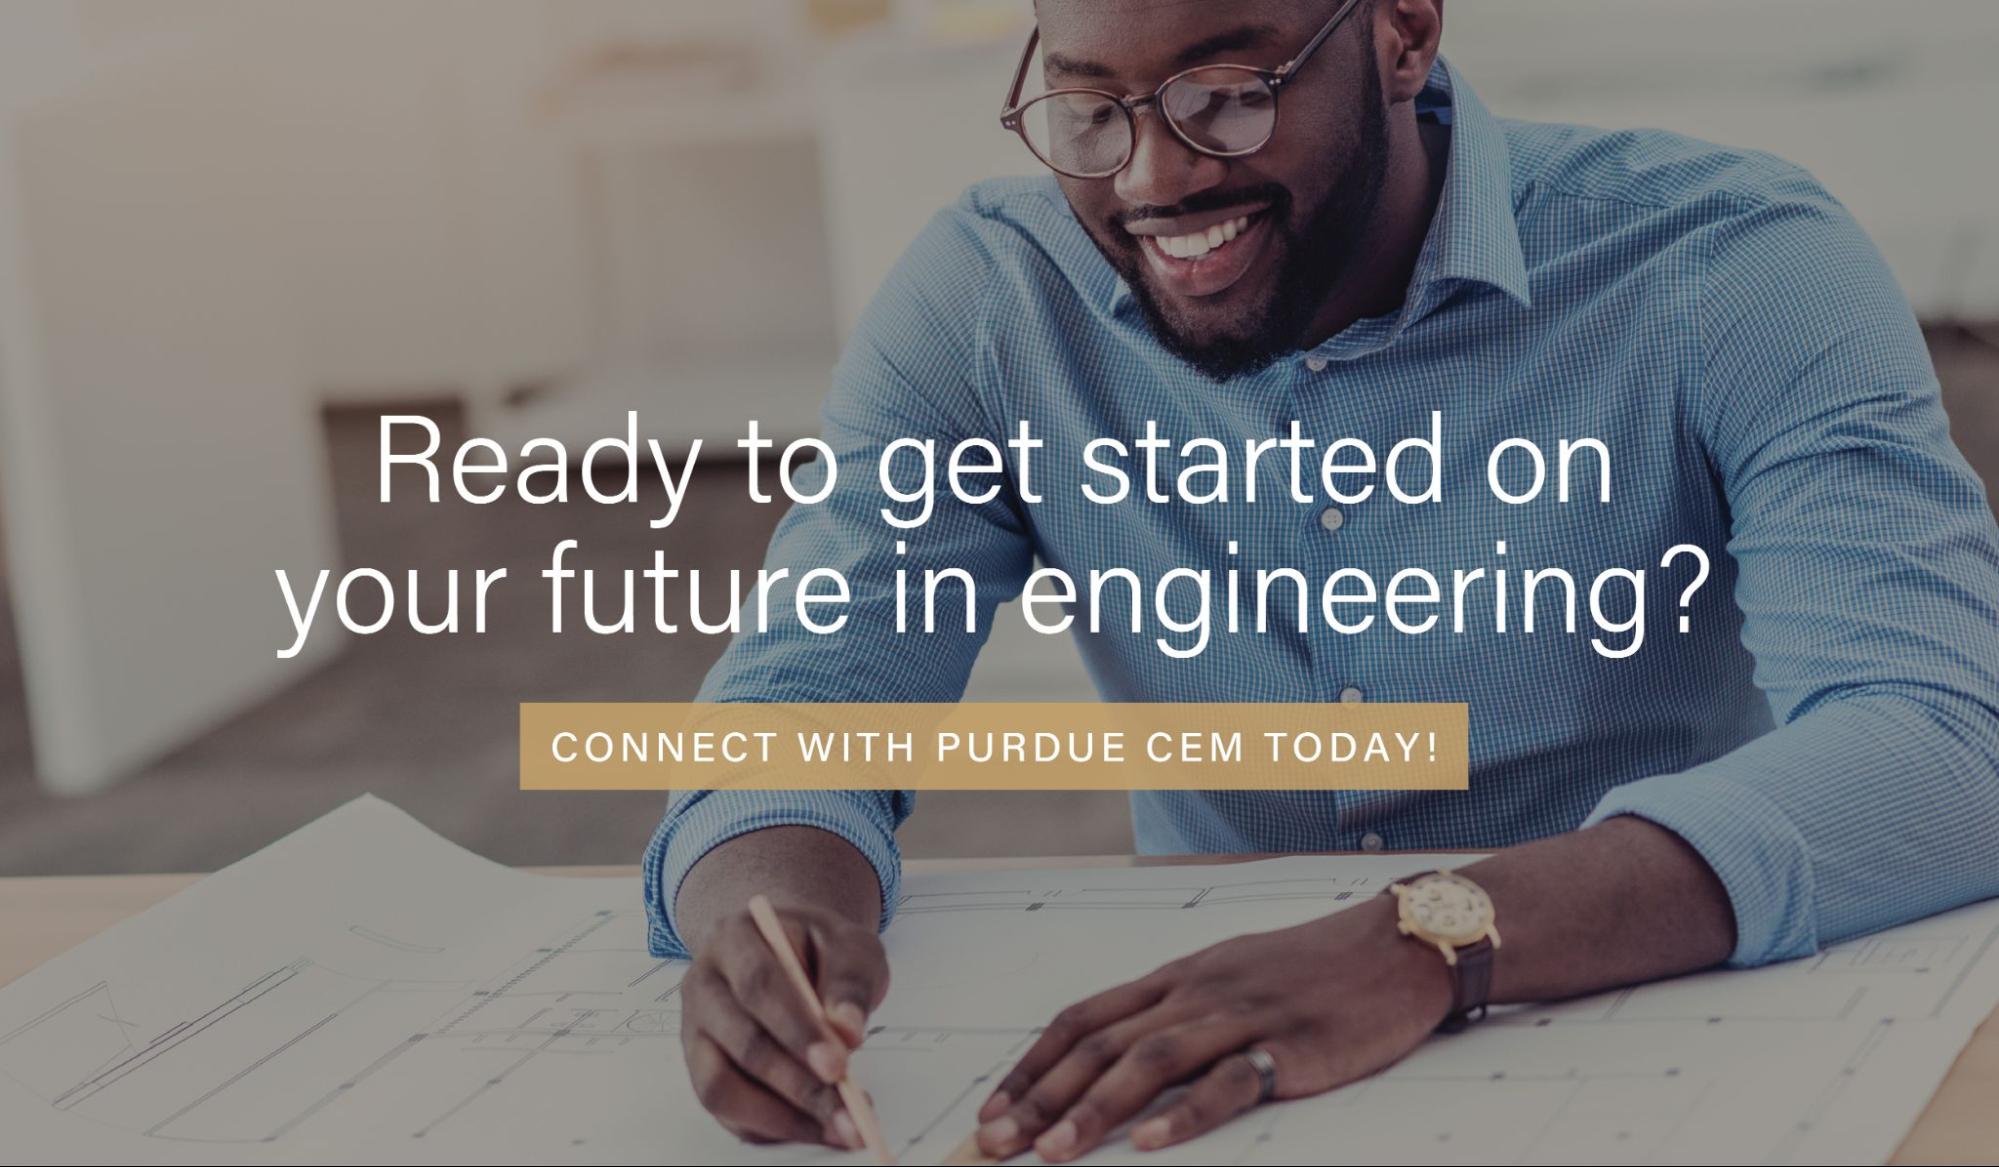 Ready to get started on your future in engineering? Connect with Purdue CEM today!